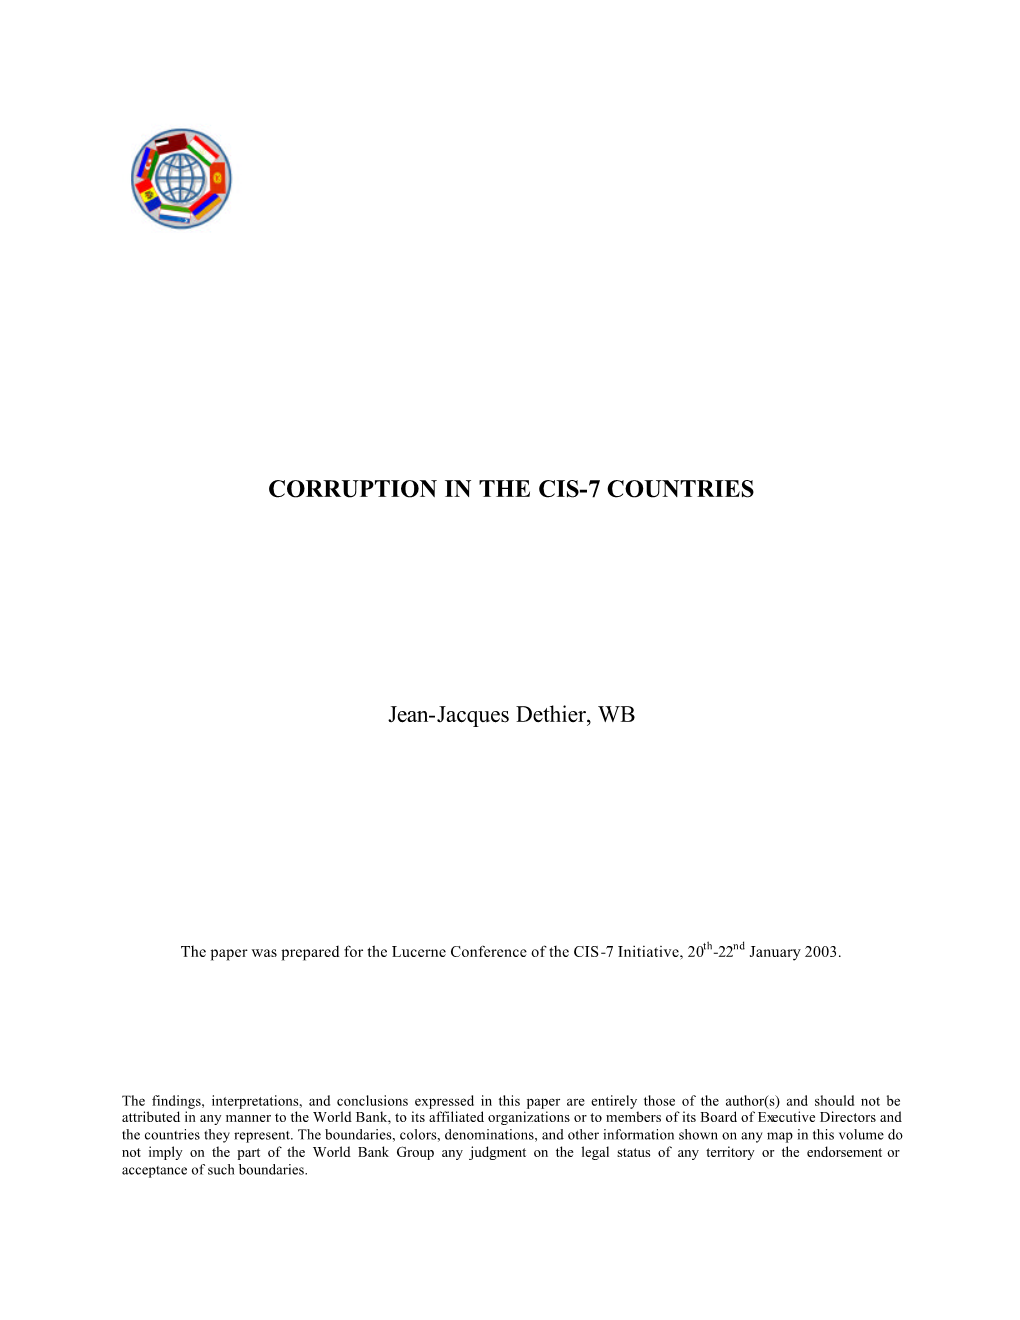 Corruption in the Cis-7 Countries